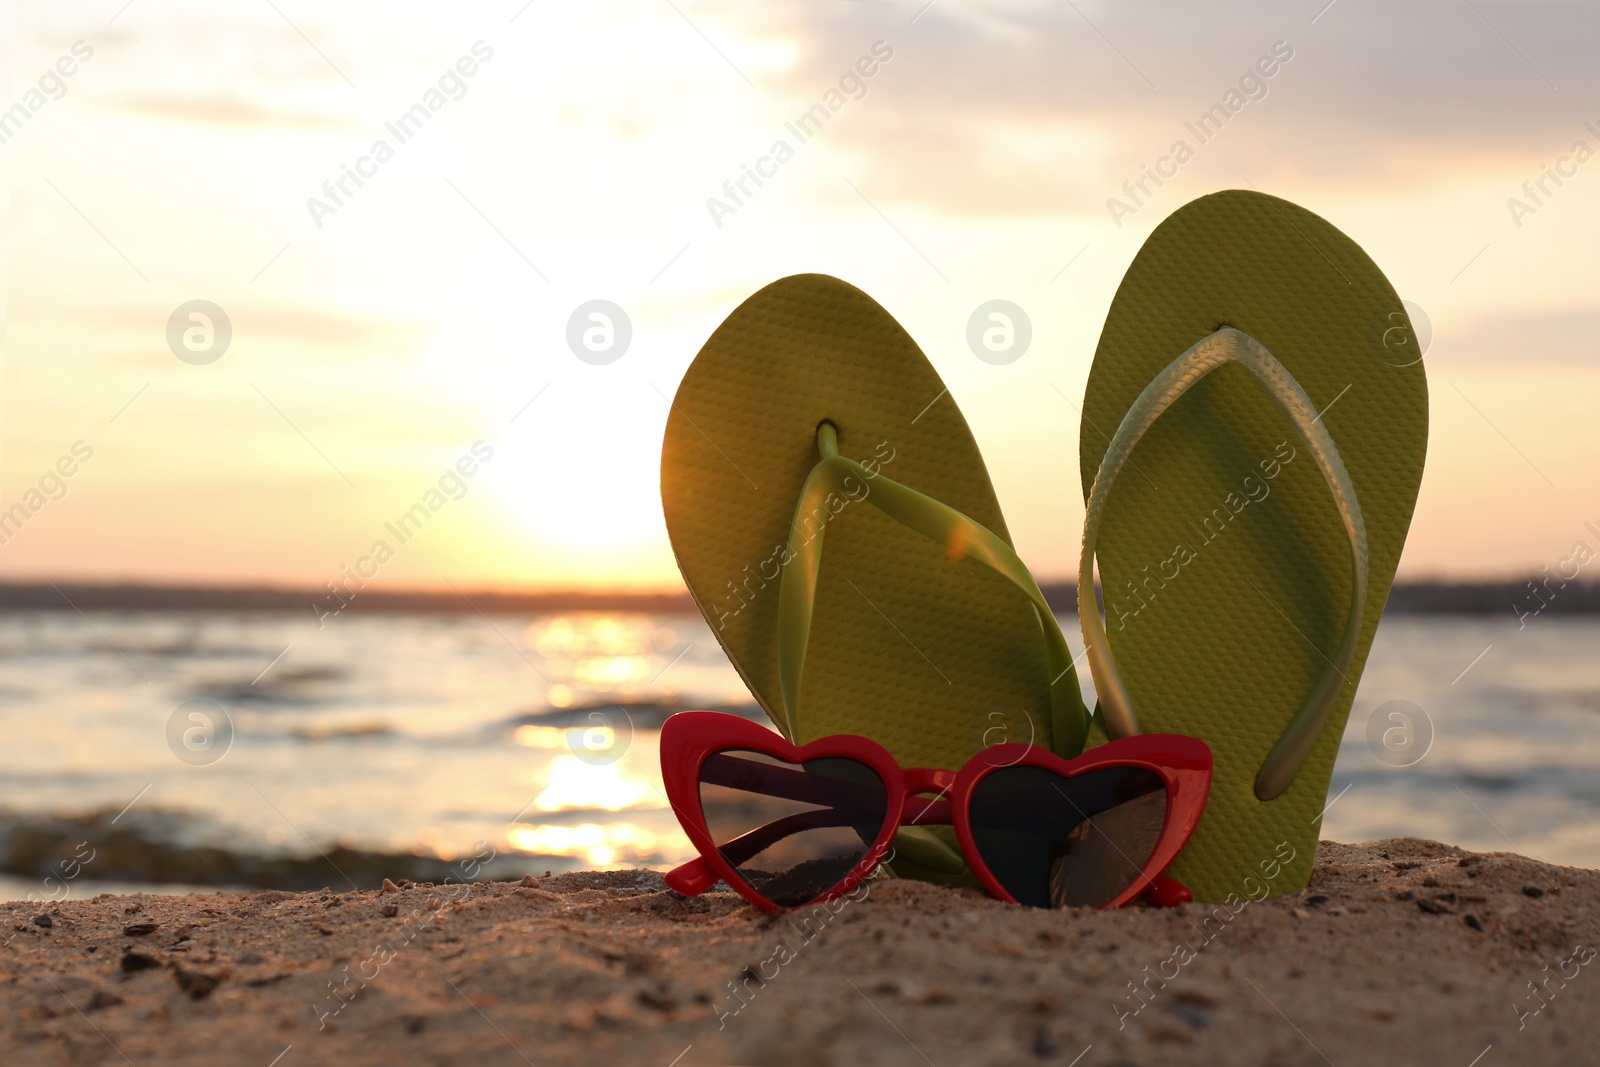 Photo of Stylish flip flops with sunglasses on sand near sea, space for text. Beach accessories